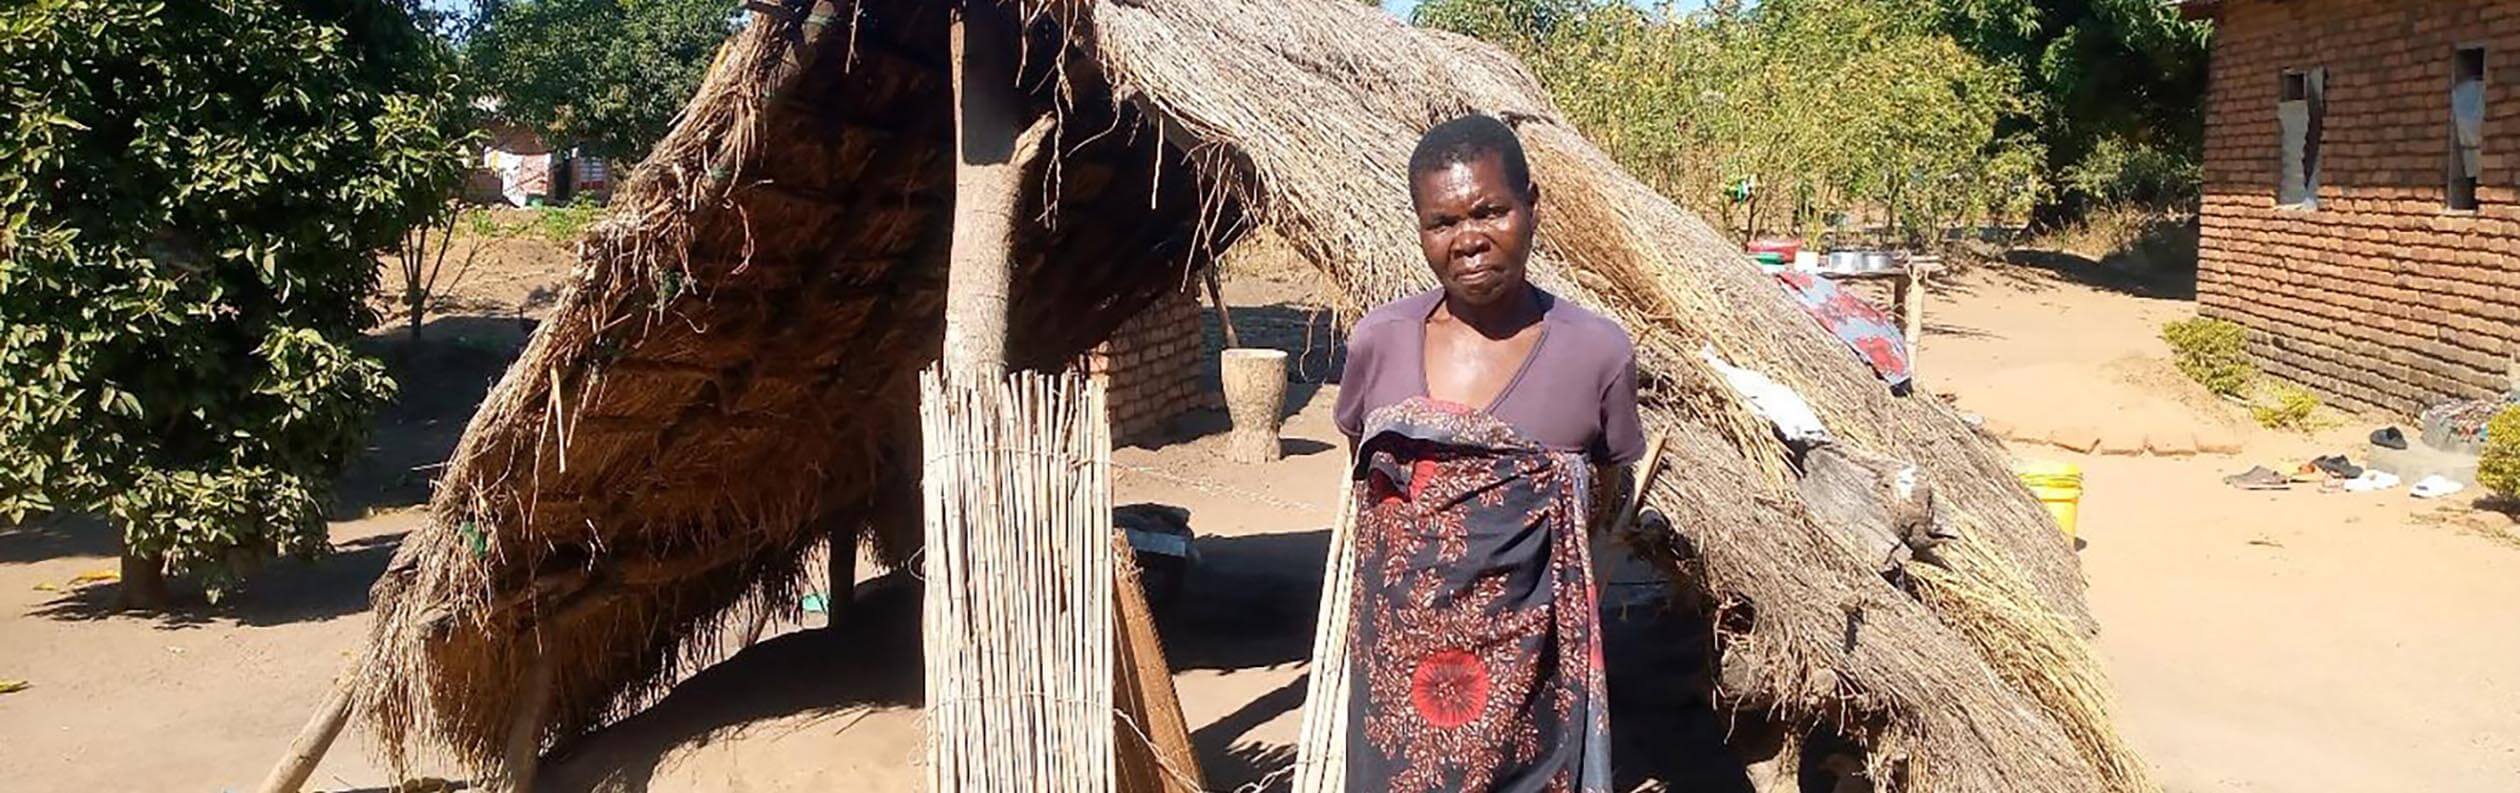 Relieve the Pain of the Sick, Suffering, and Disabled in Malawi and Help Them Live with Dignity